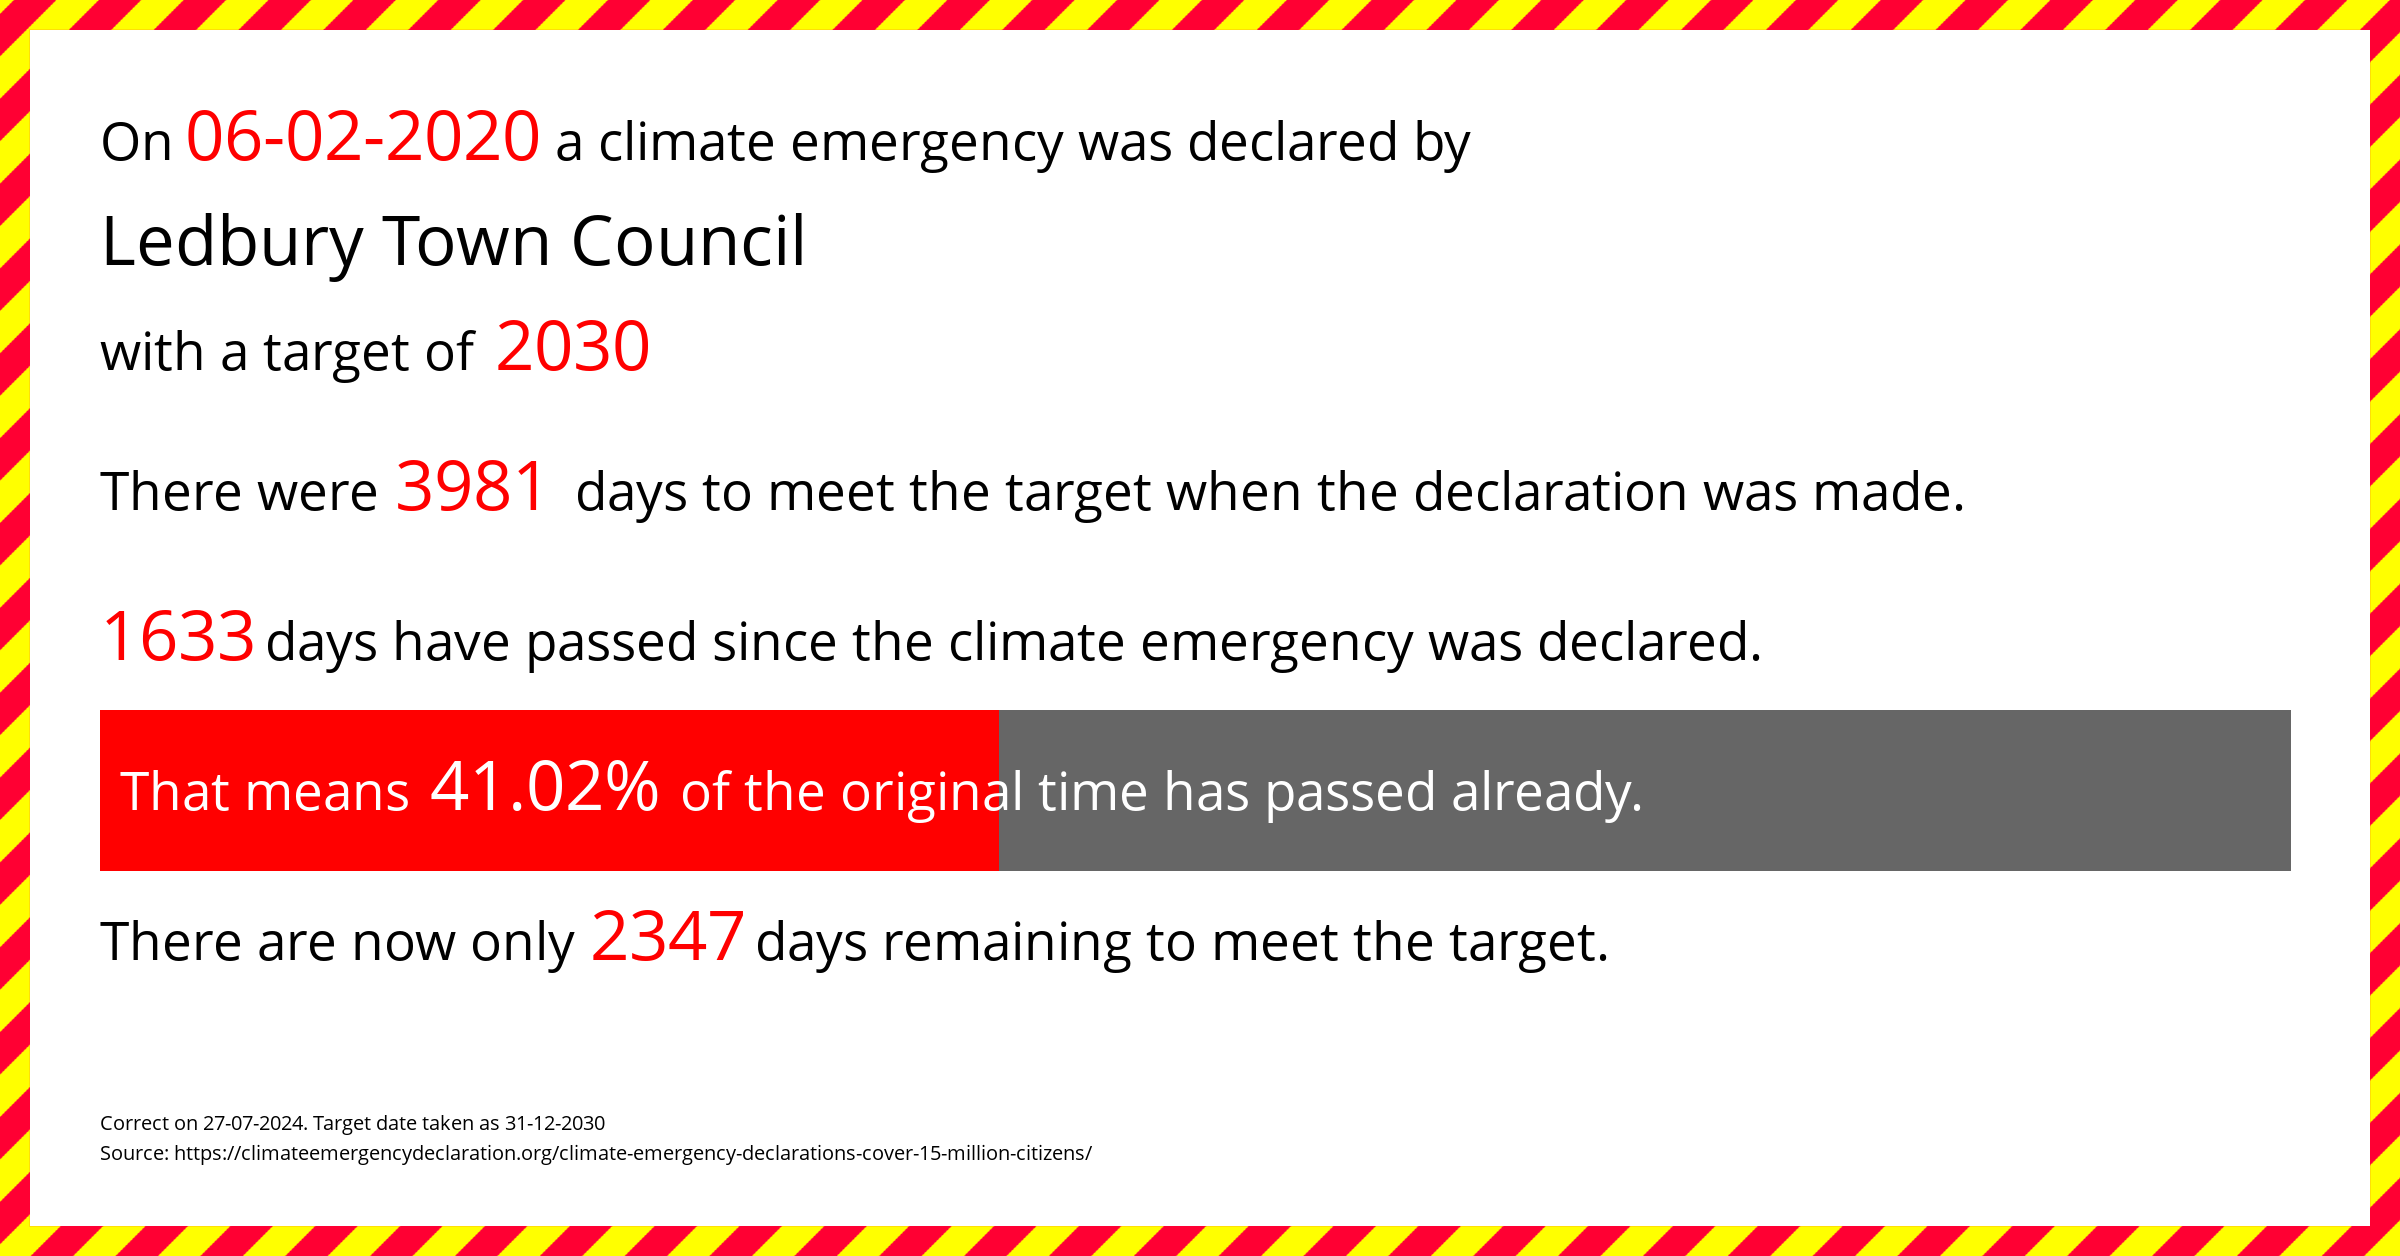 Ledbury Town Council declared a Climate emergency on Thursday 6th February 2020, with a target of 2030.